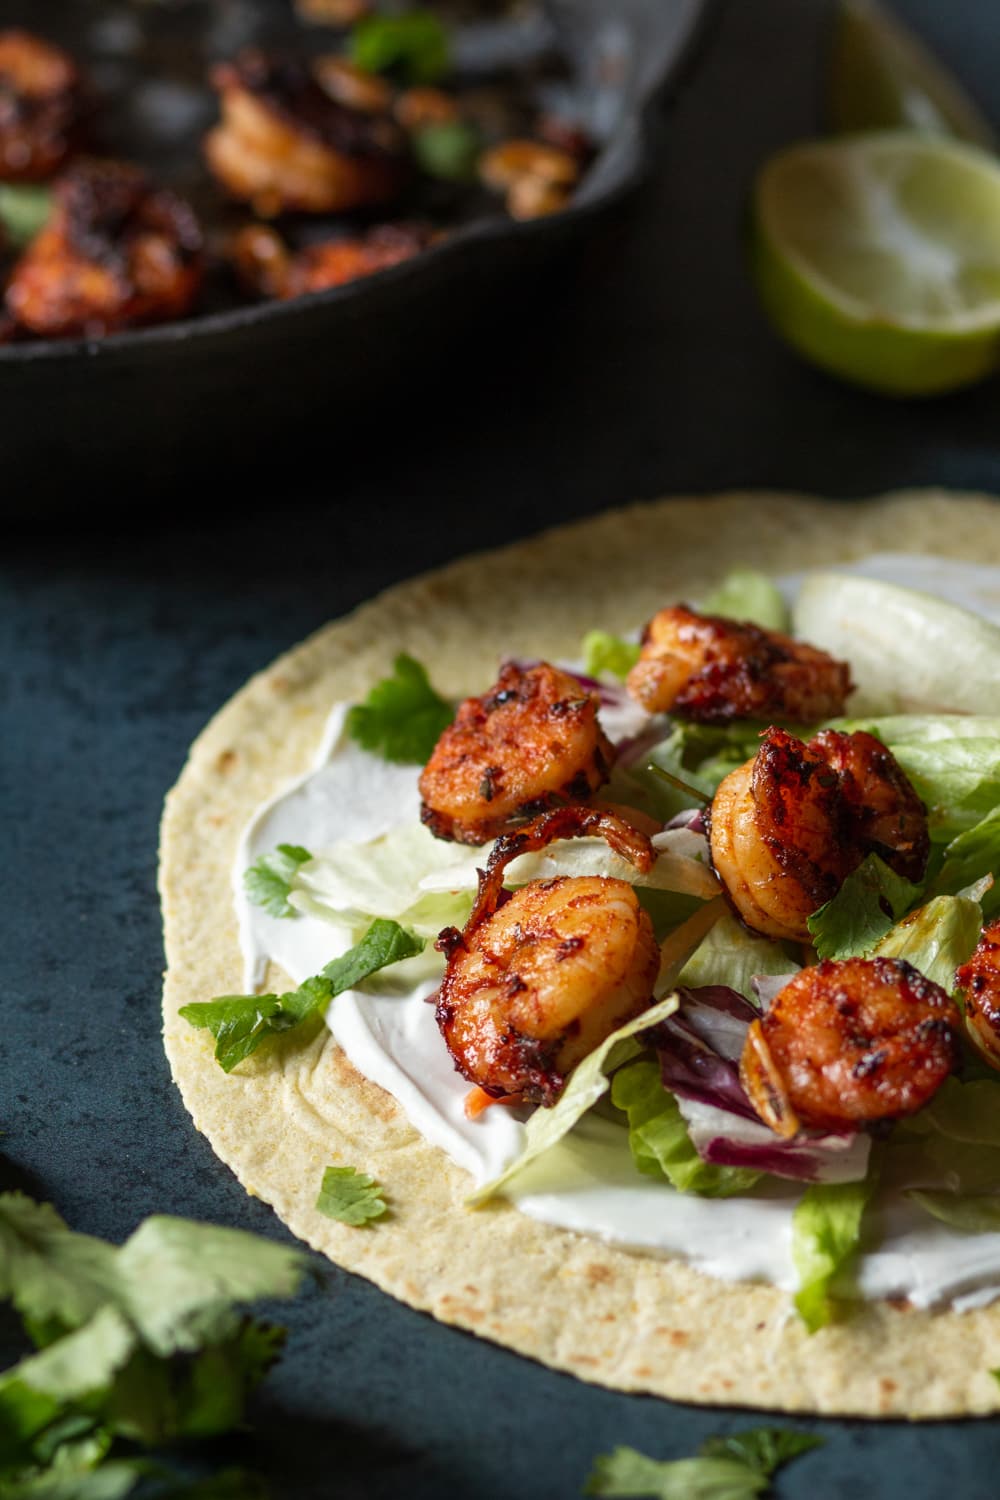 A tortilla shell with sour cream spread on it and a few pieces of blackened shrimp and some shredded lettuce on top. The tortilla shell is laying flat on a blue counter and a skillet filled with blackened shrimp is set behind the shell.